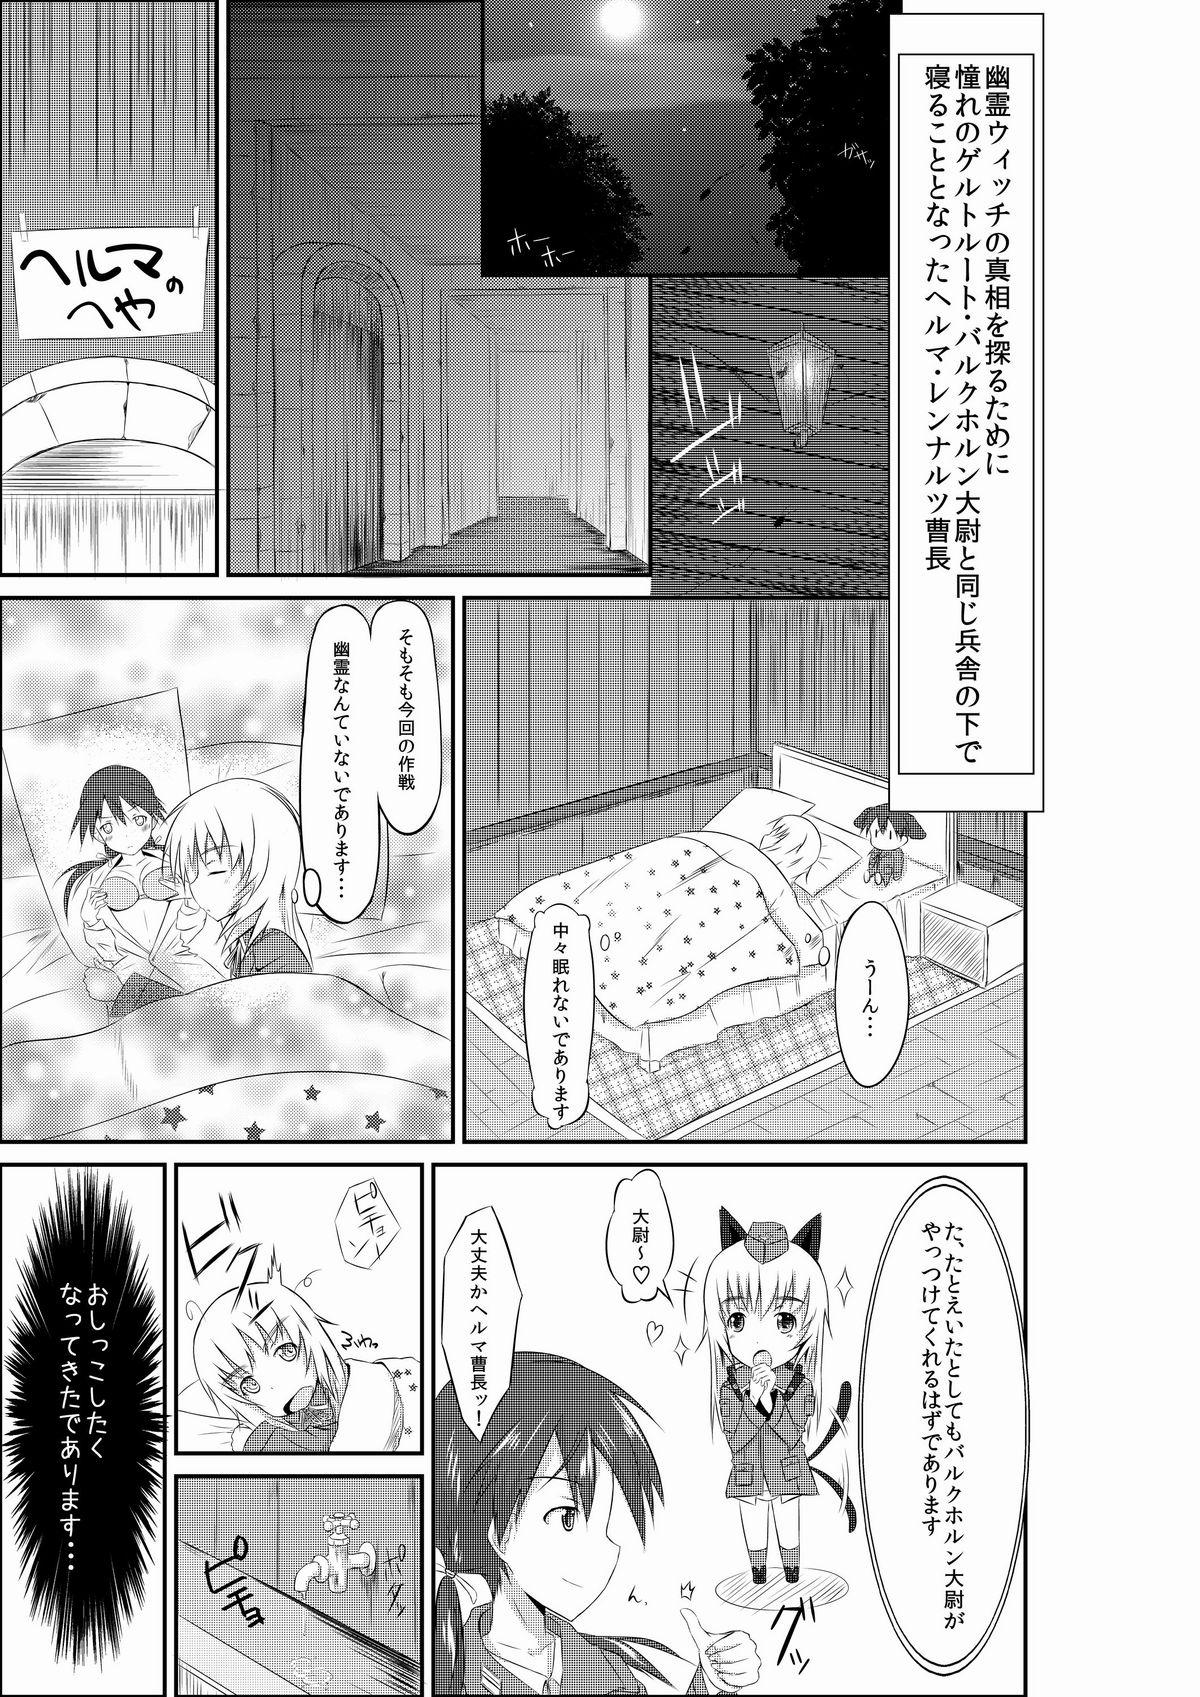 Gayemo 練習 お姉ちゃんとヘルマちゃん - Strike witches Porno 18 - Picture 1